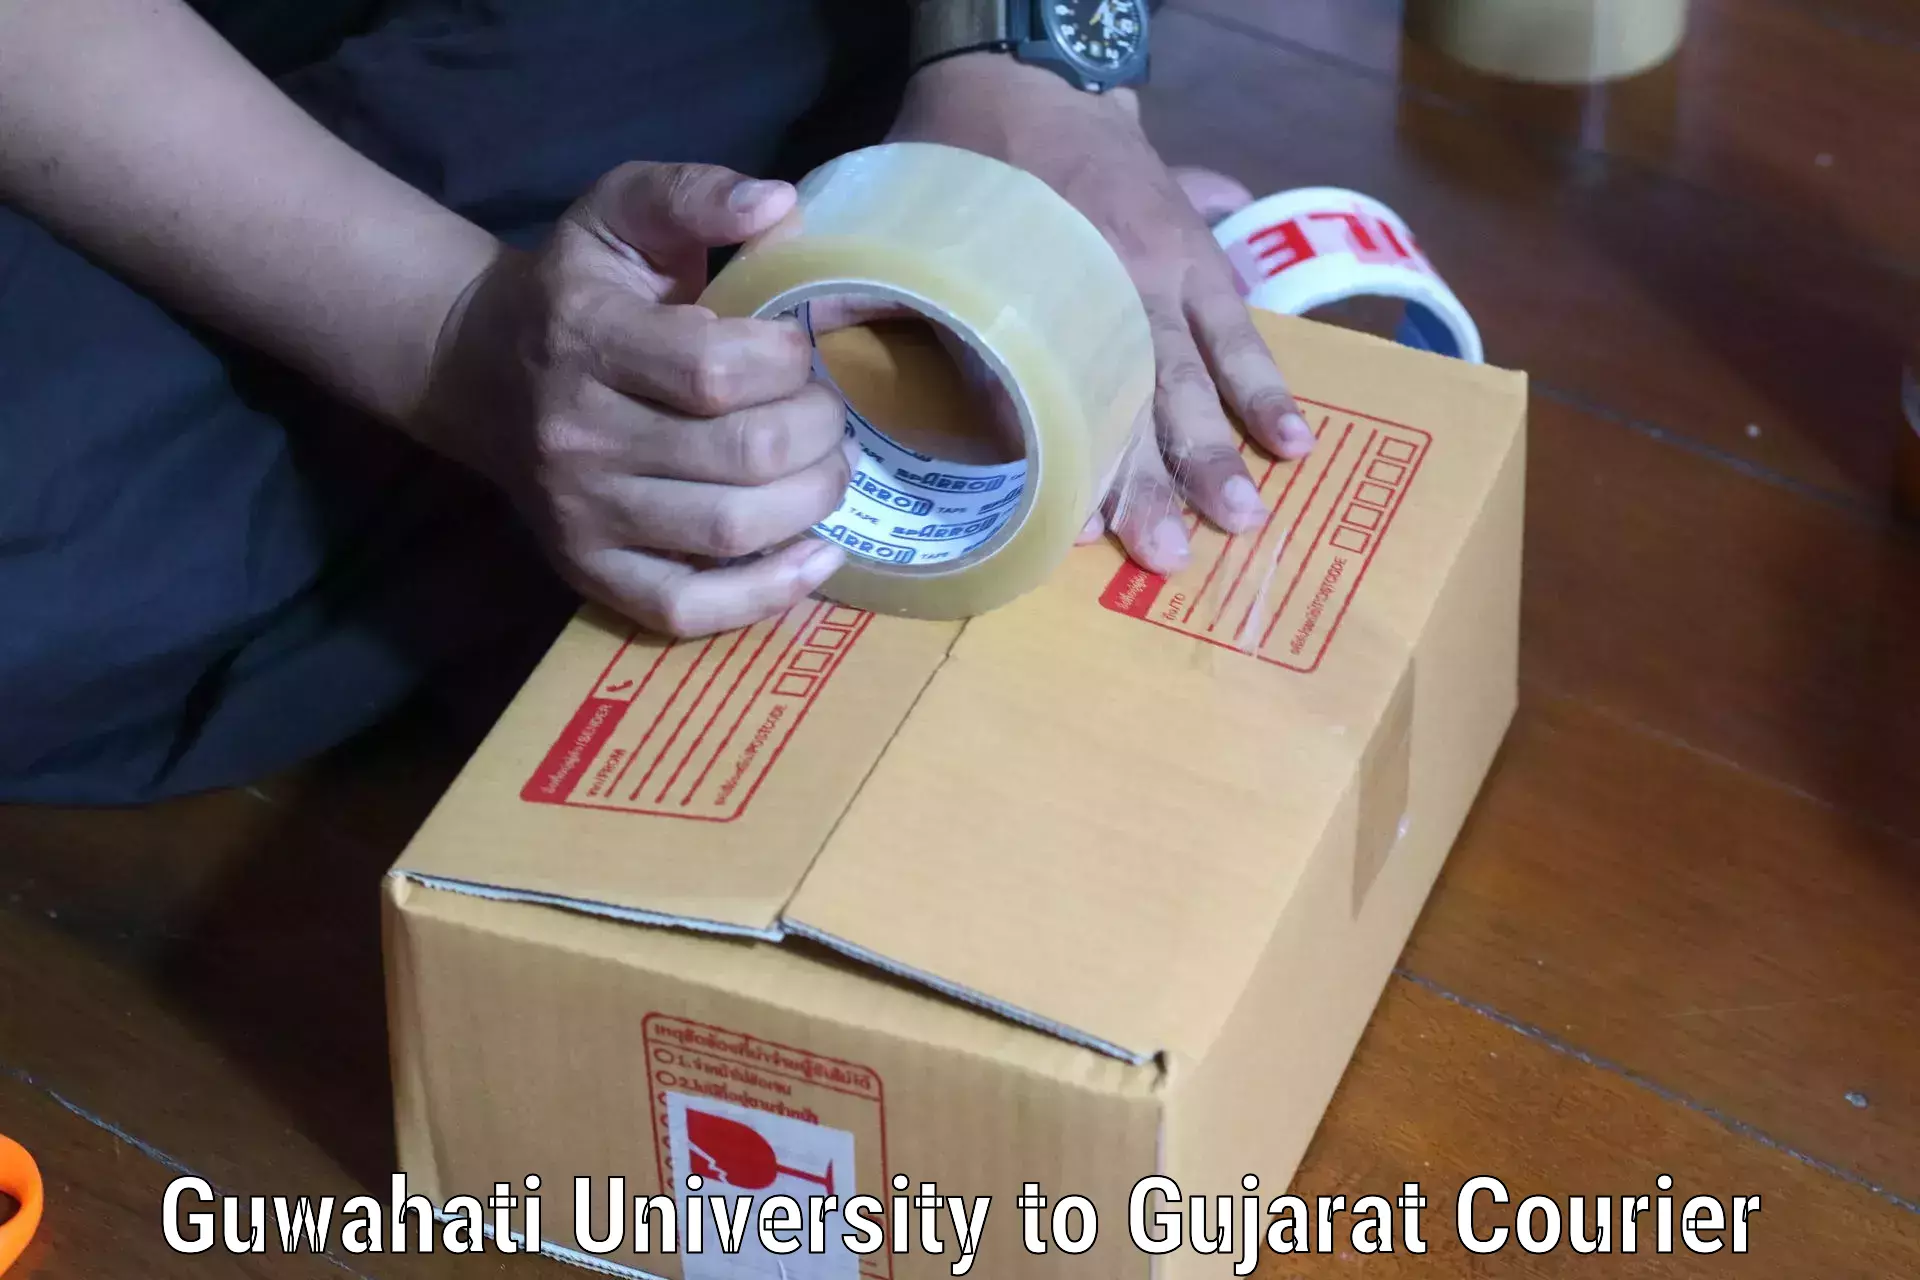 24/7 shipping services Guwahati University to Dholka